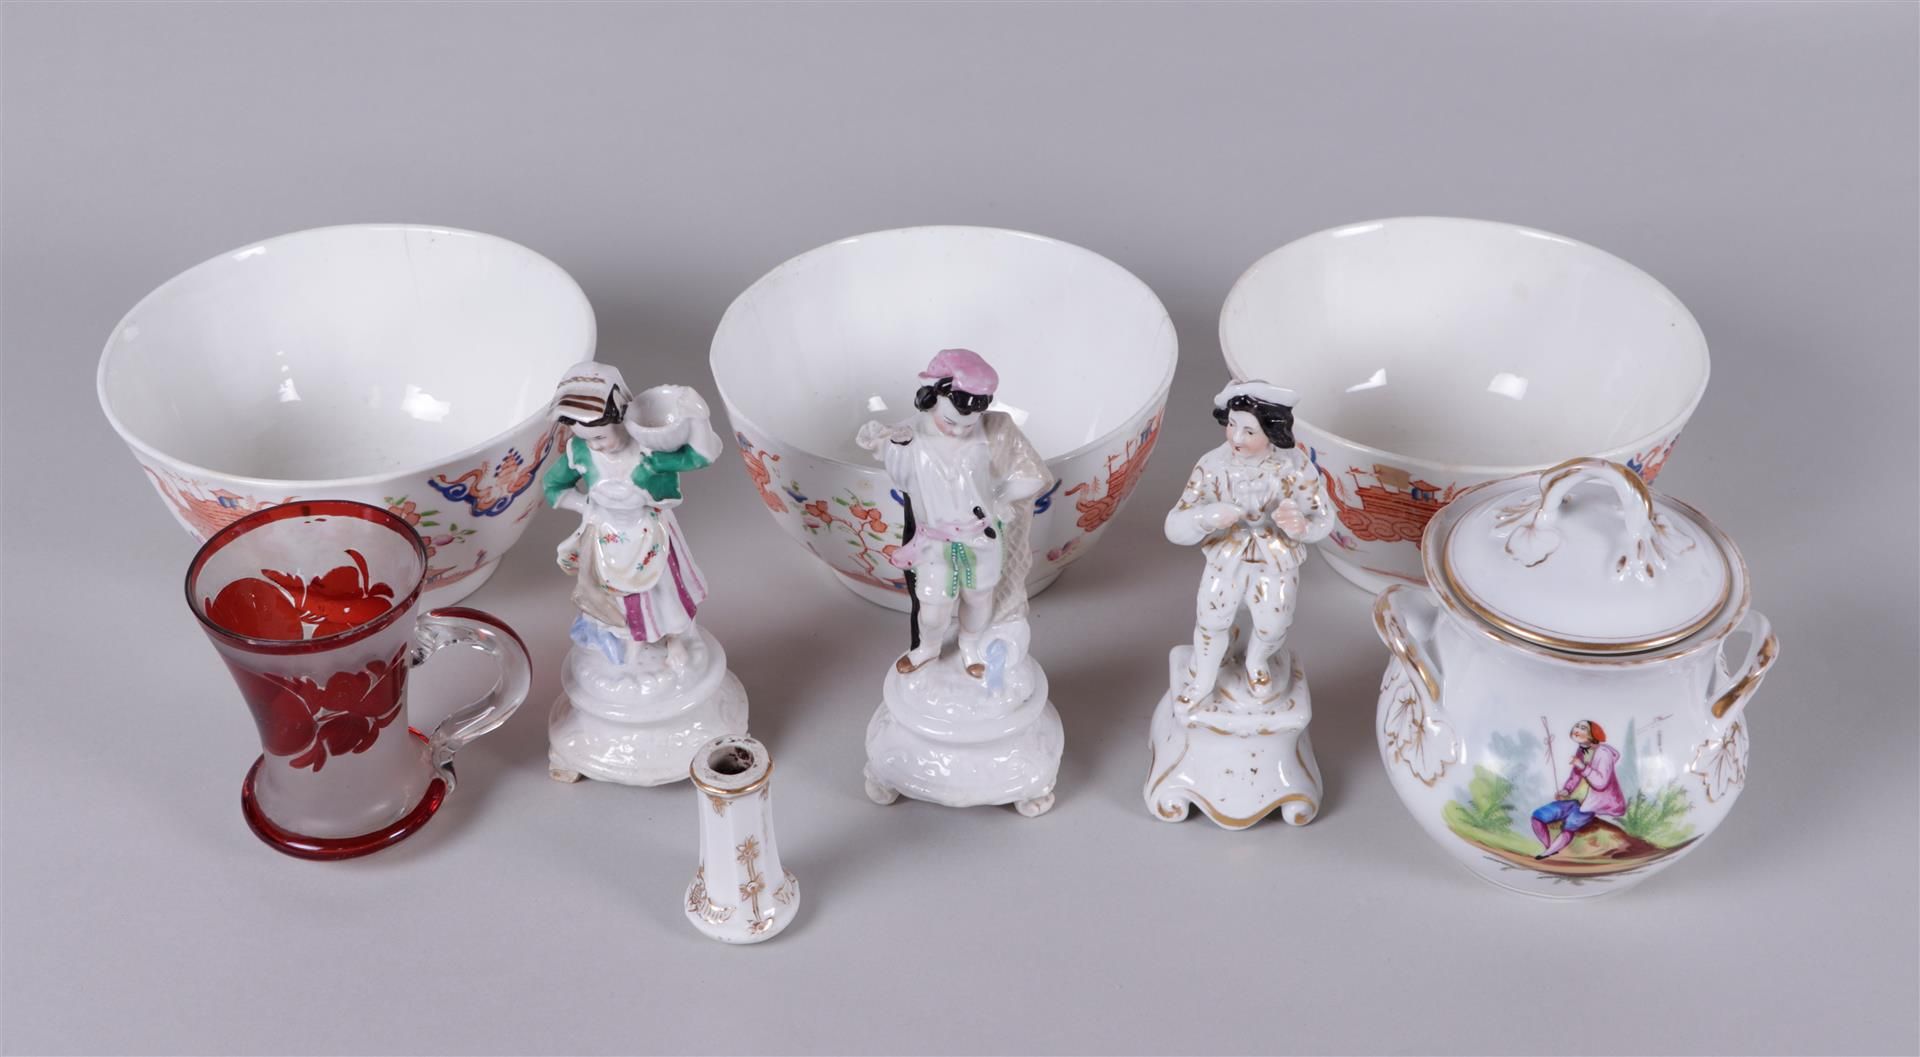 3x Bowls with stencil technique, red-colored English 19th century, plus 3x Porcelain figurines and a